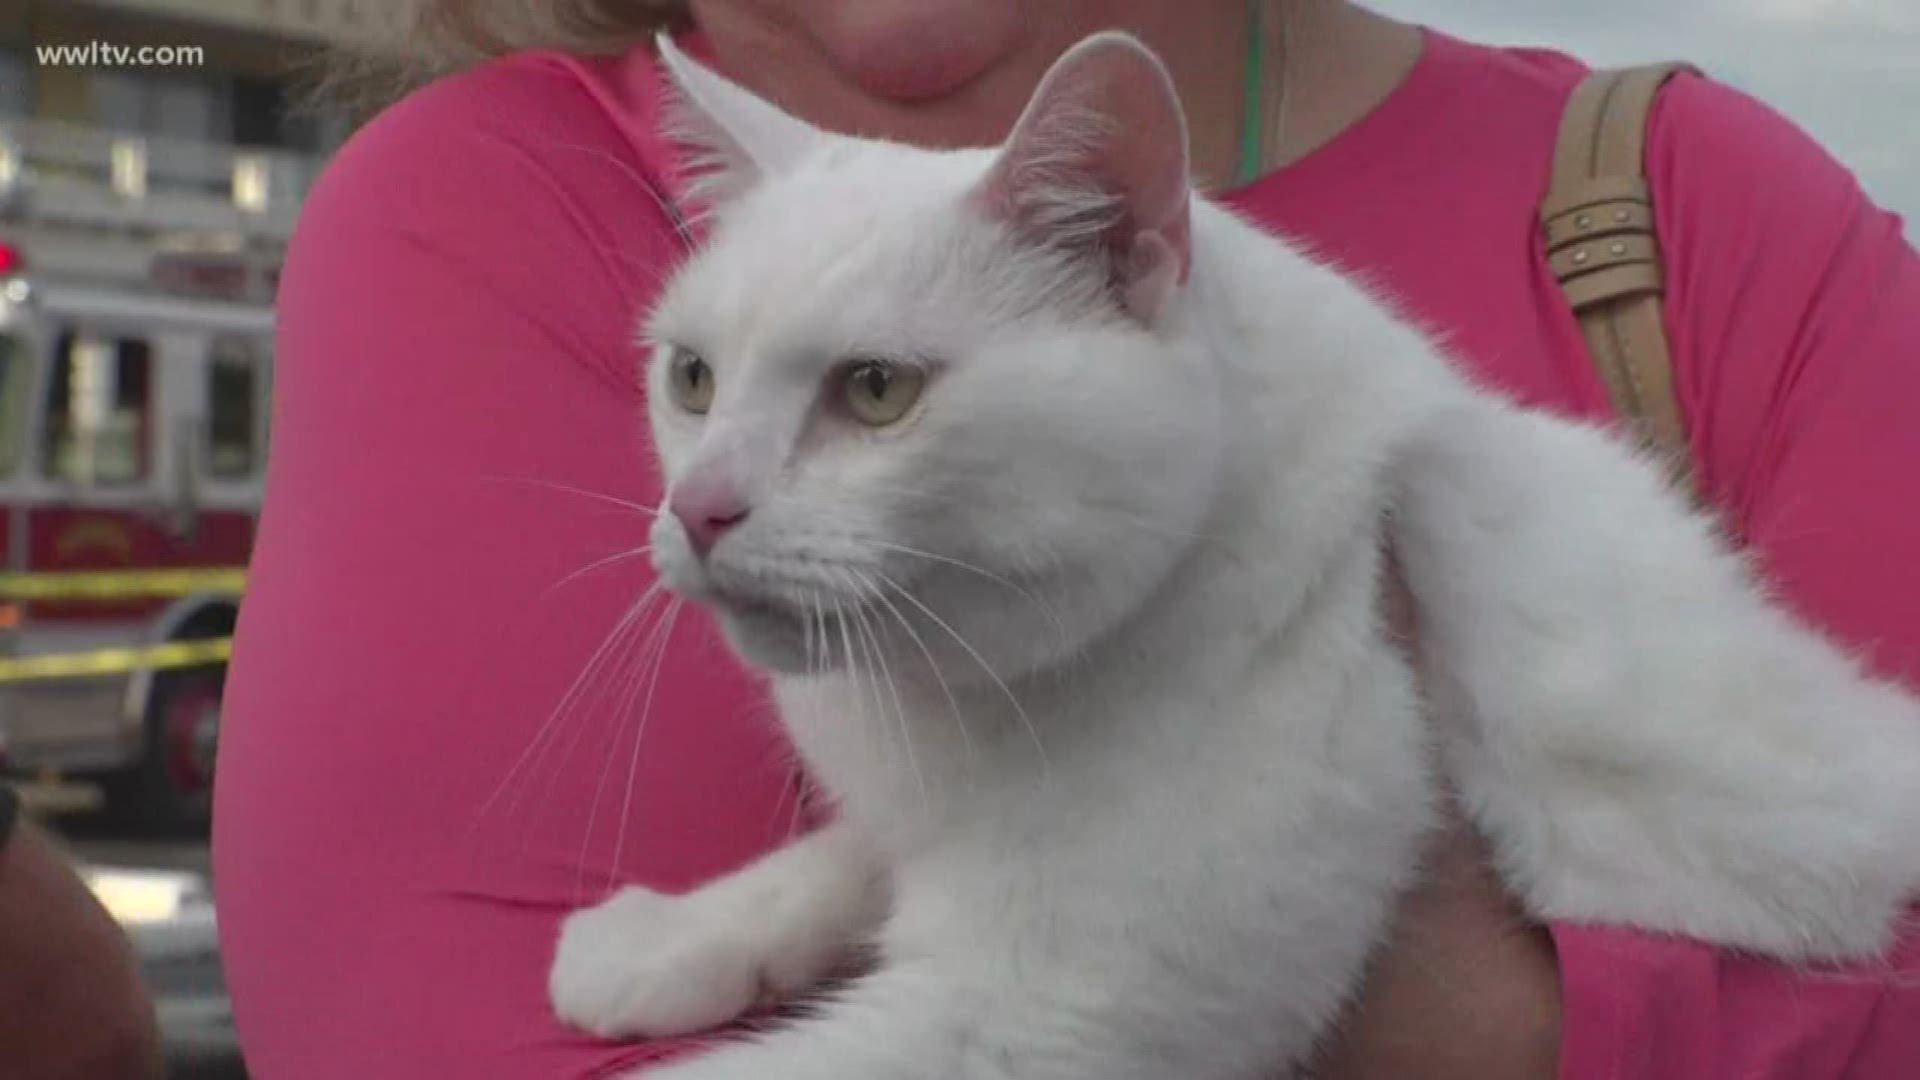 It was a happy reunion on live television when a cat was reunited with its owner after a fire.